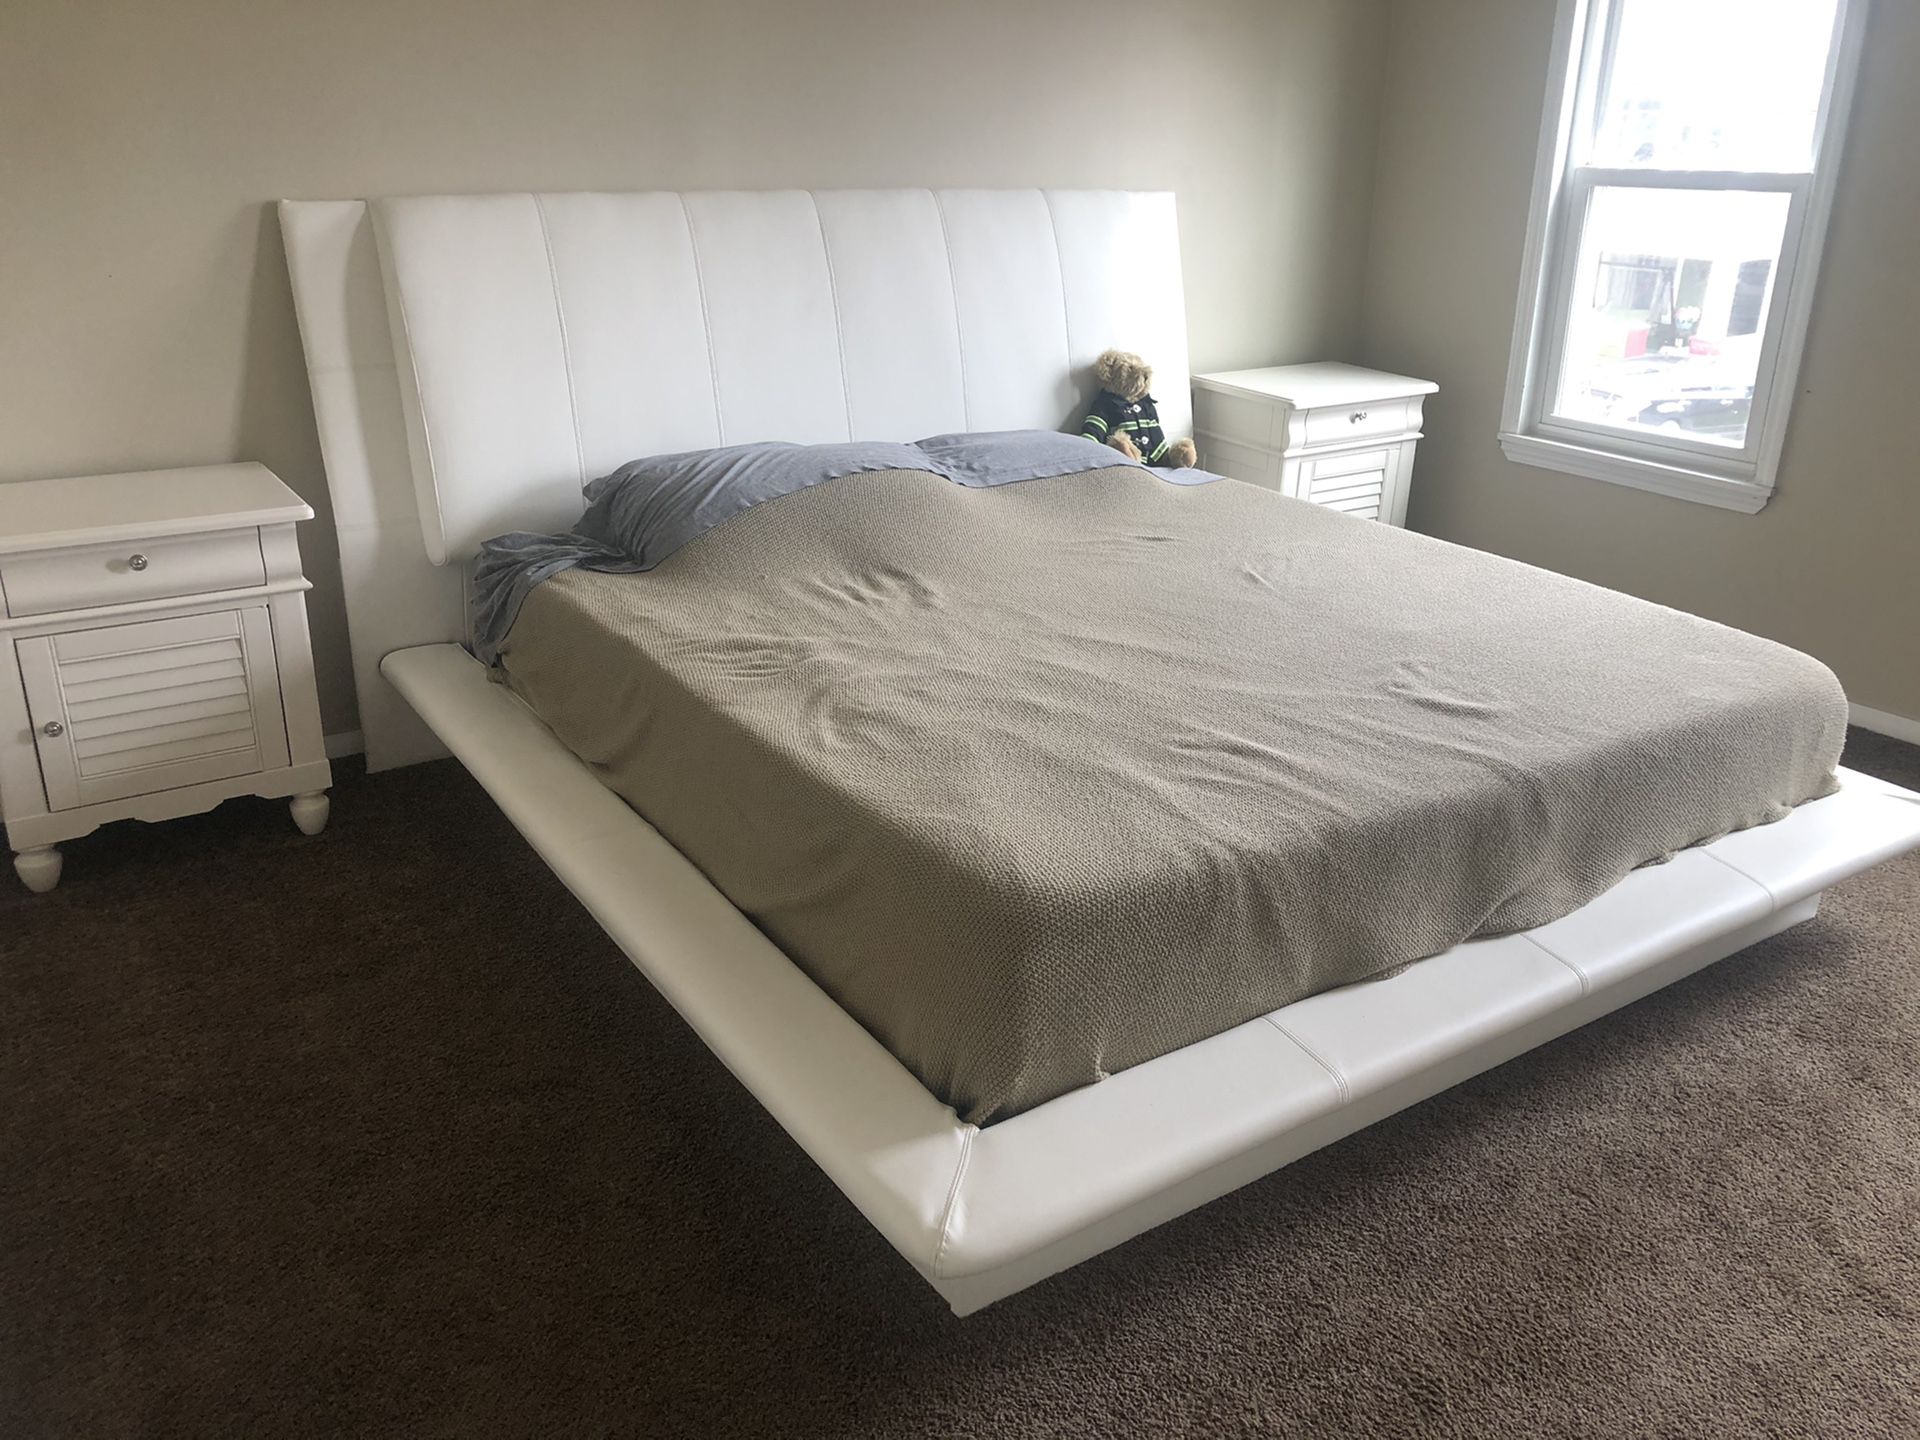 King size bed *like new*